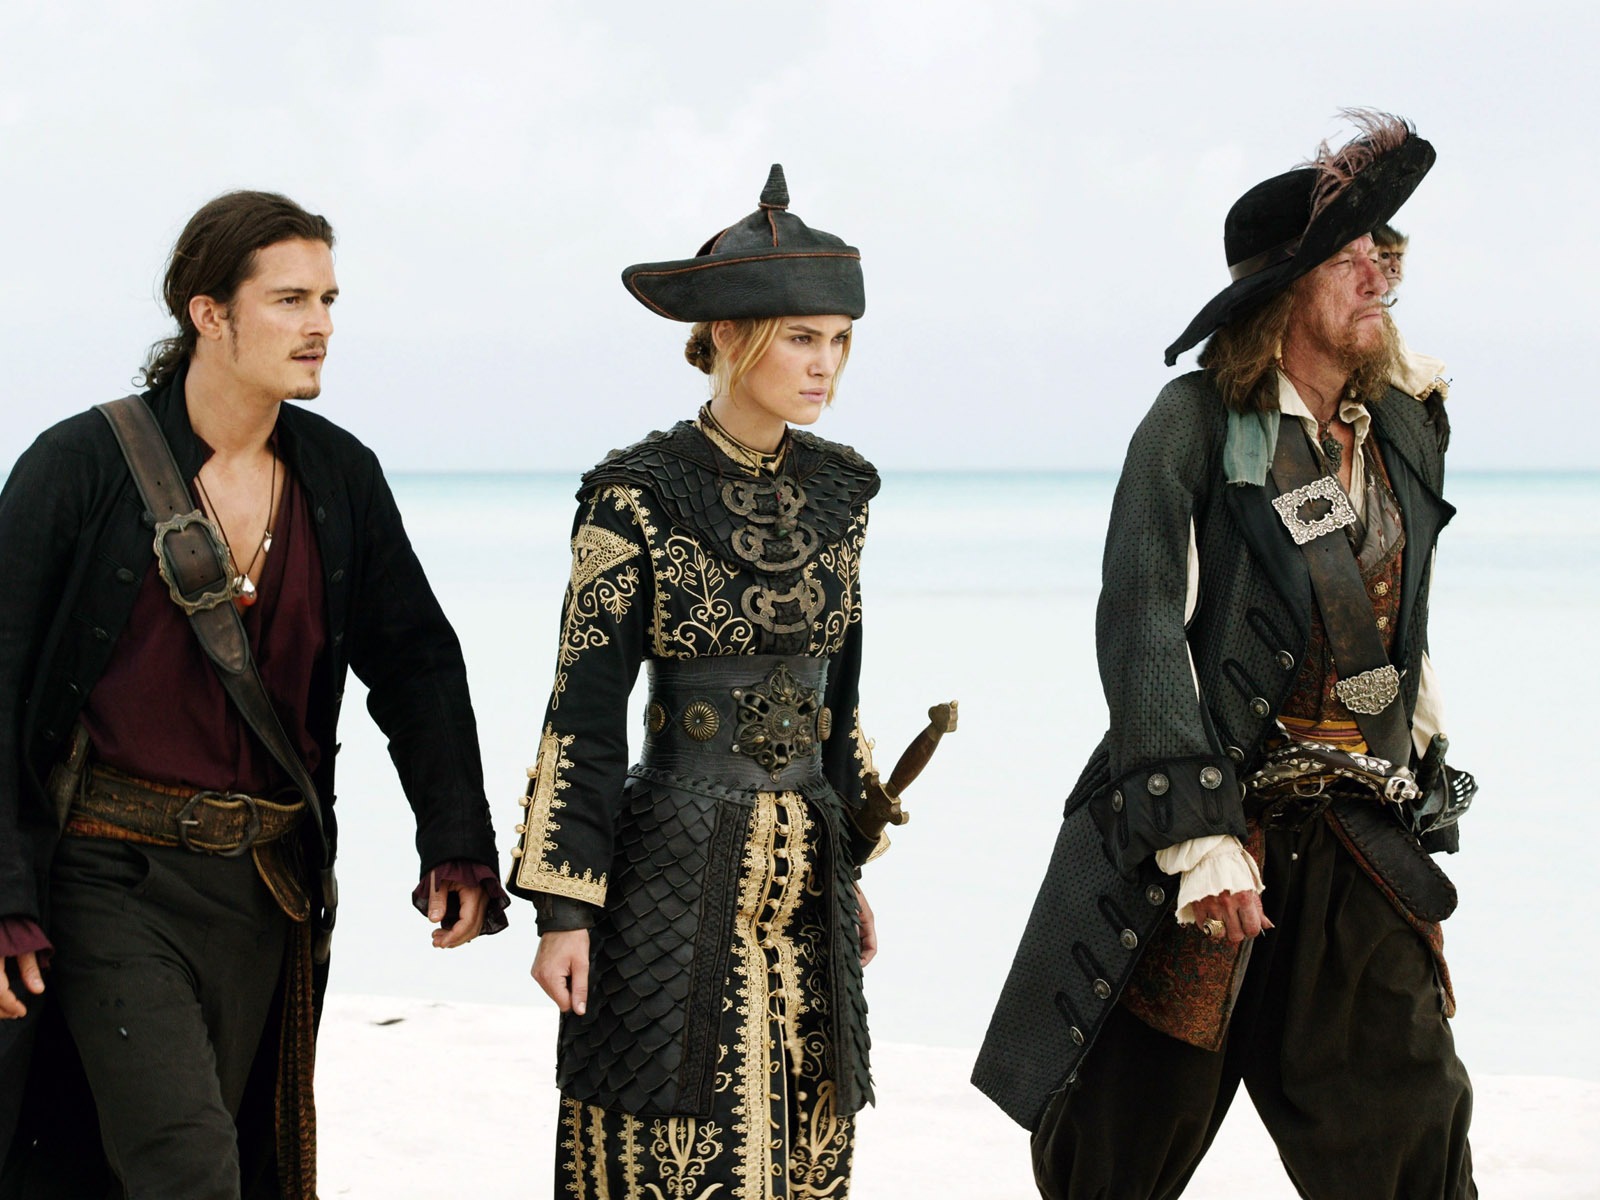 Pirates of the Caribbean 3 HD Wallpapers #14 - 1600x1200